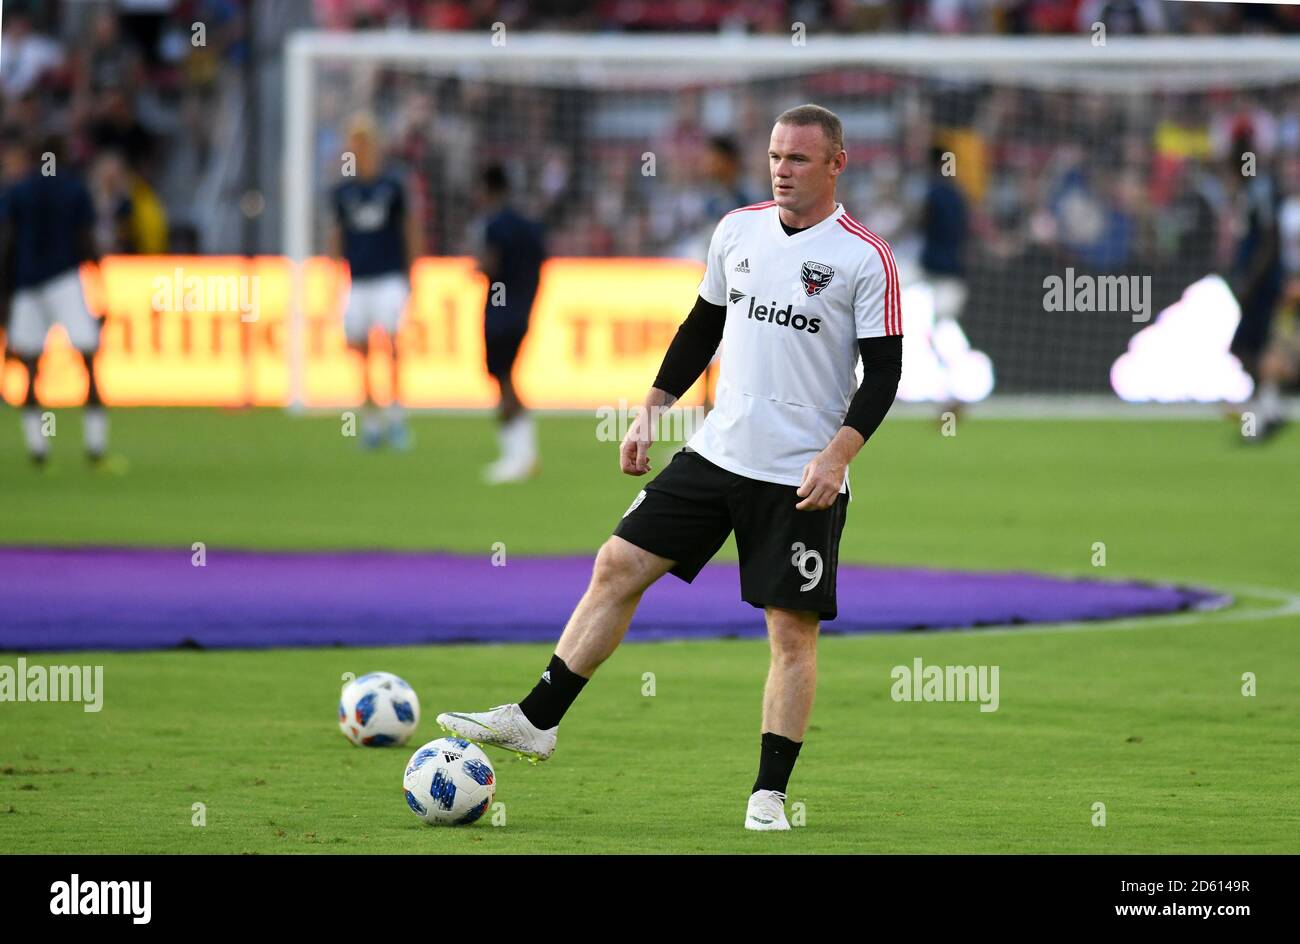 DC United player Wayne Rooney  in action before the Major League Soccer match between D.C. United and Vancouver Whitecaps FC at the Audi Field Stadium on July 14, 2018 in Washington D.C.  Stock Photo